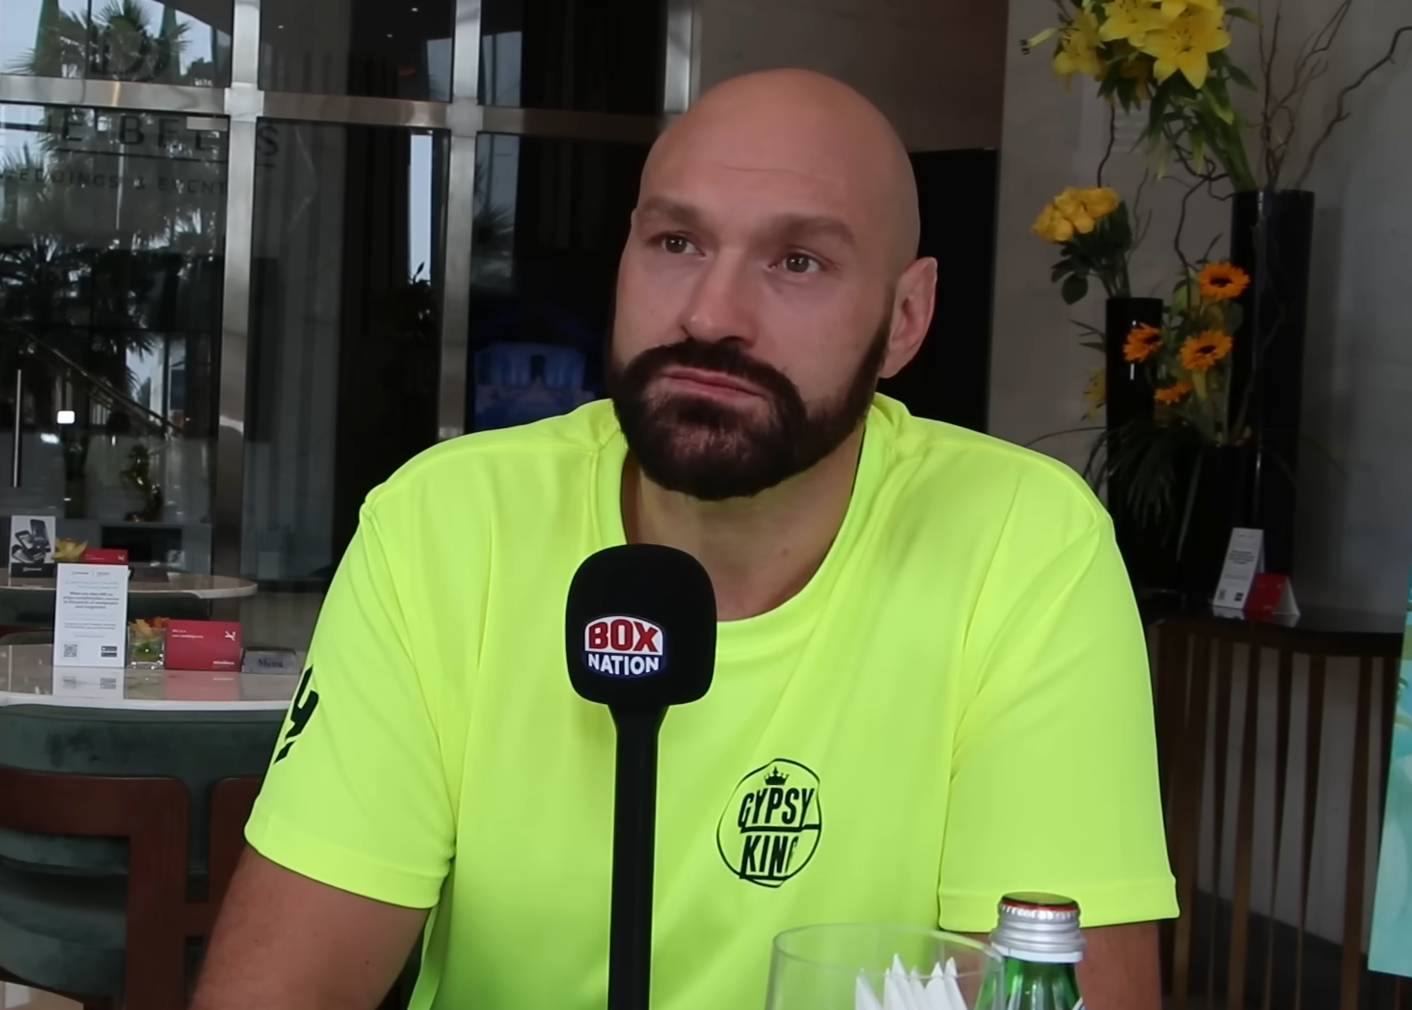 ''It will be a sweet victory'': Fury tells how he is going to beat Usyk